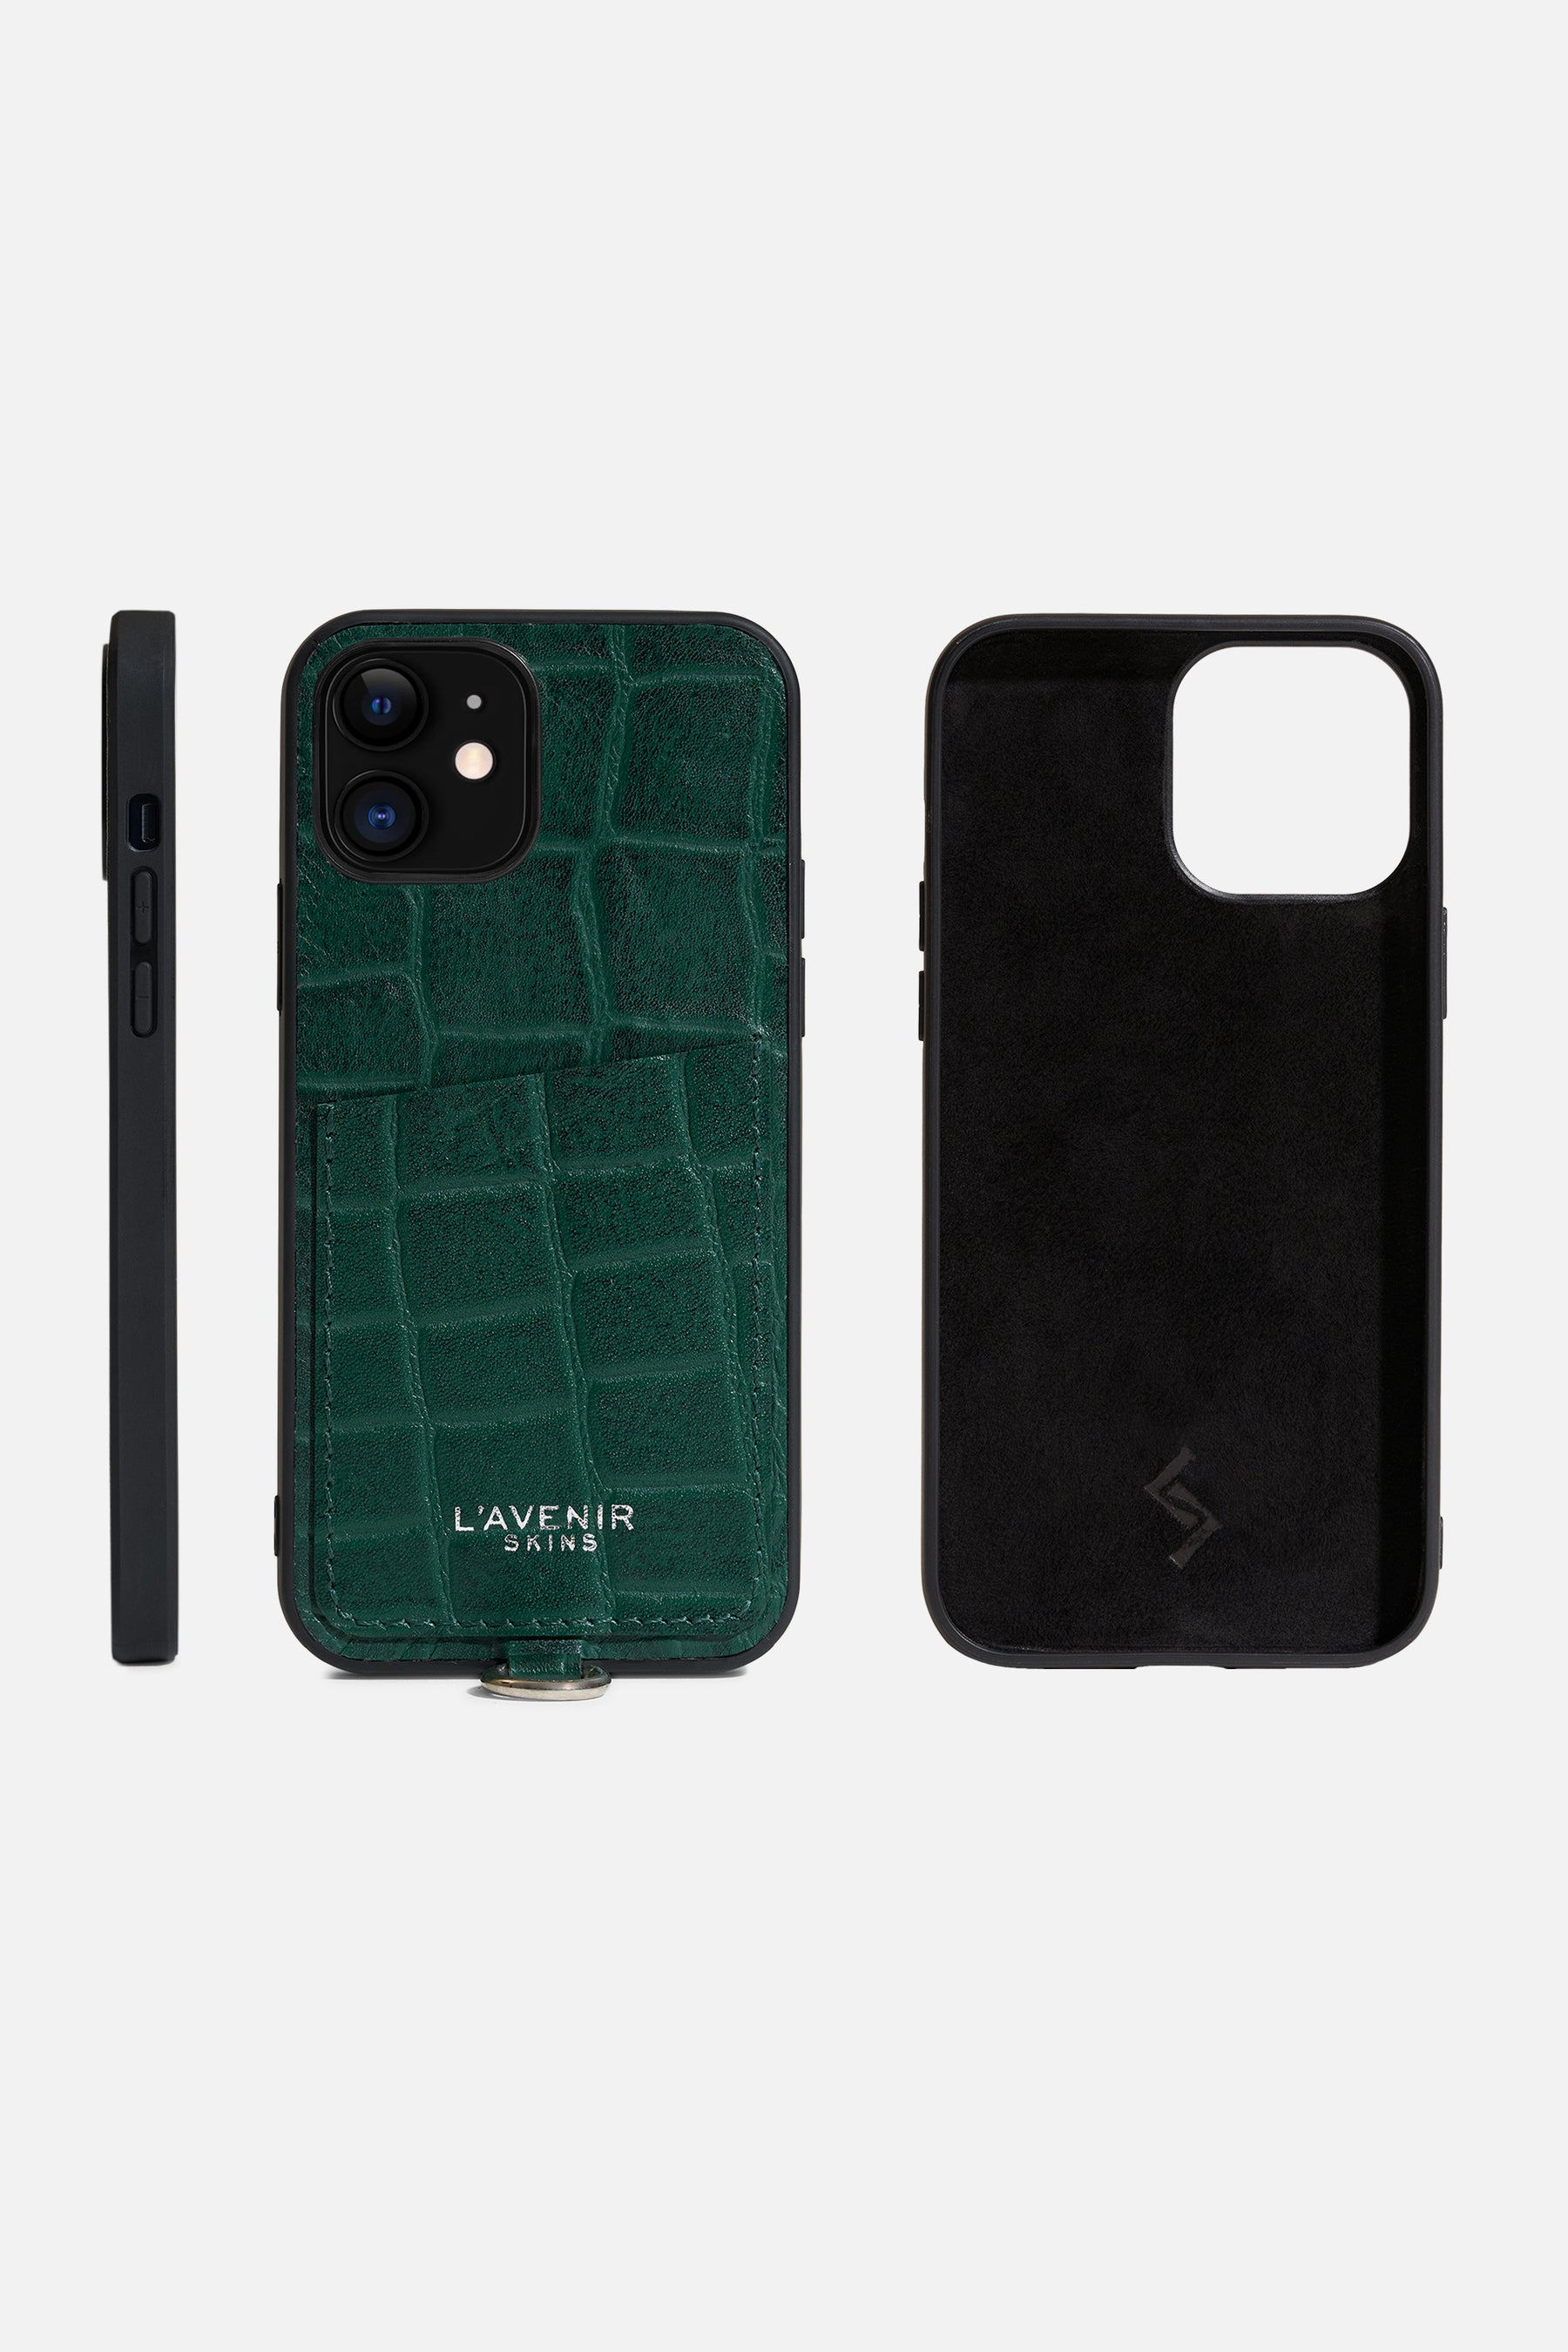 IPHONE SLING CASE - CROCO LEATHER - FOREST GREEN